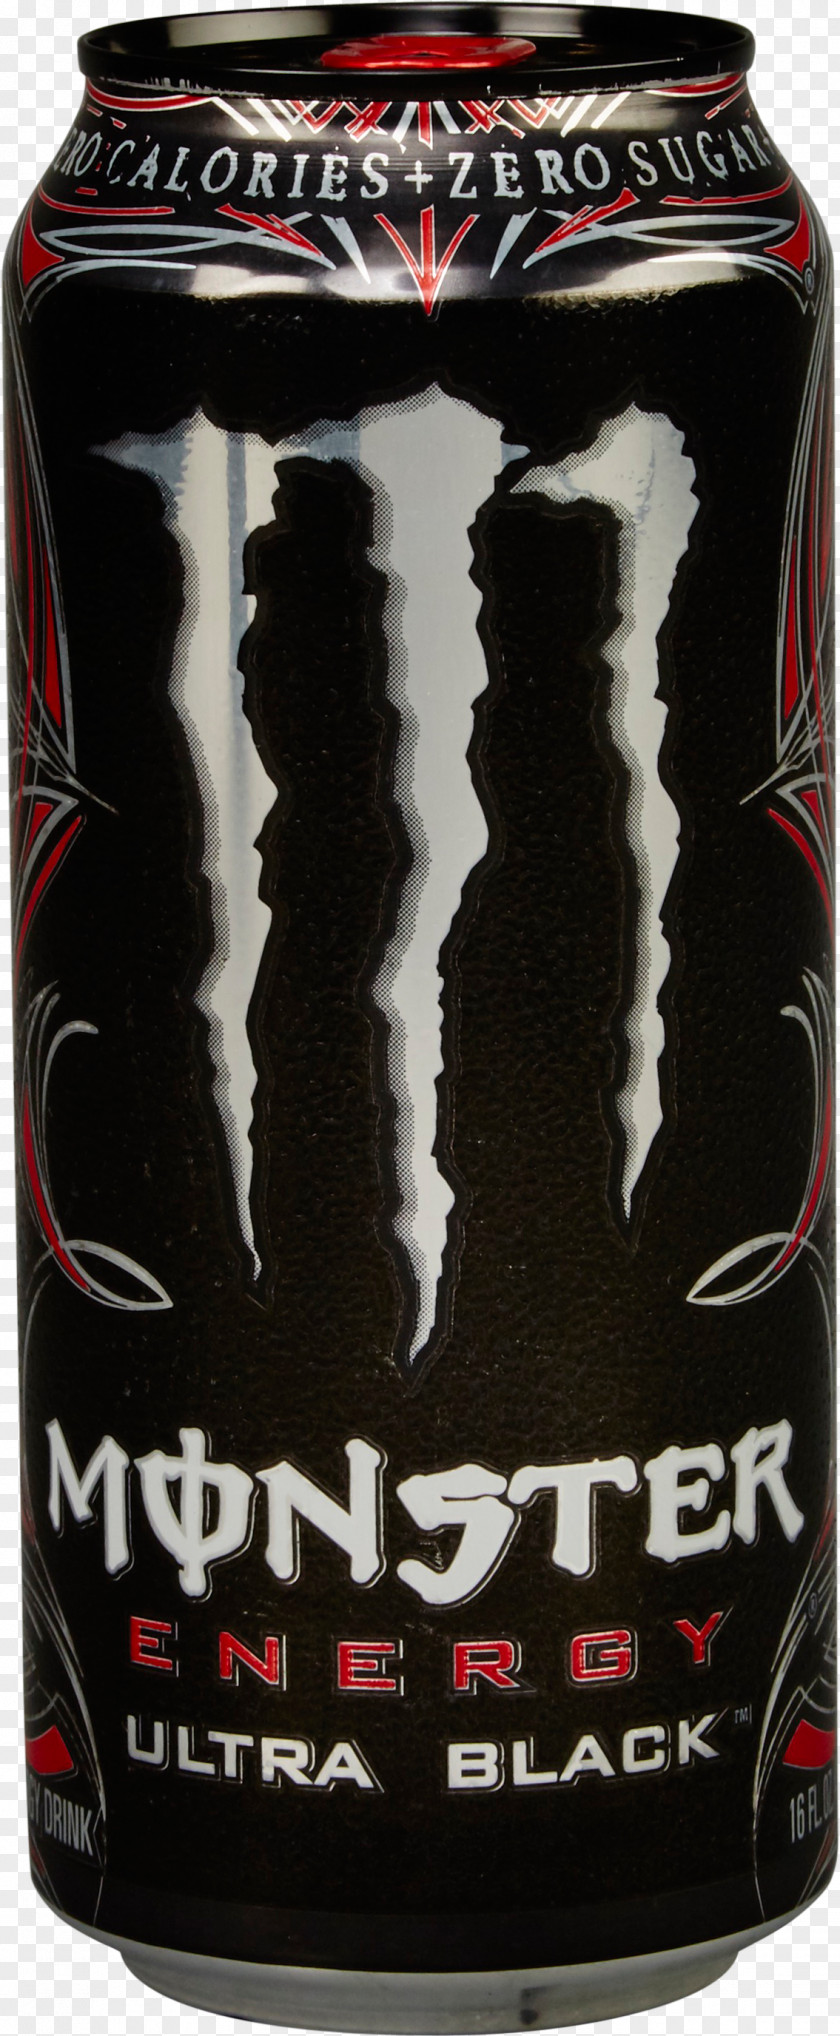 Drink Monster Energy Sports & Drinks Fizzy PNG